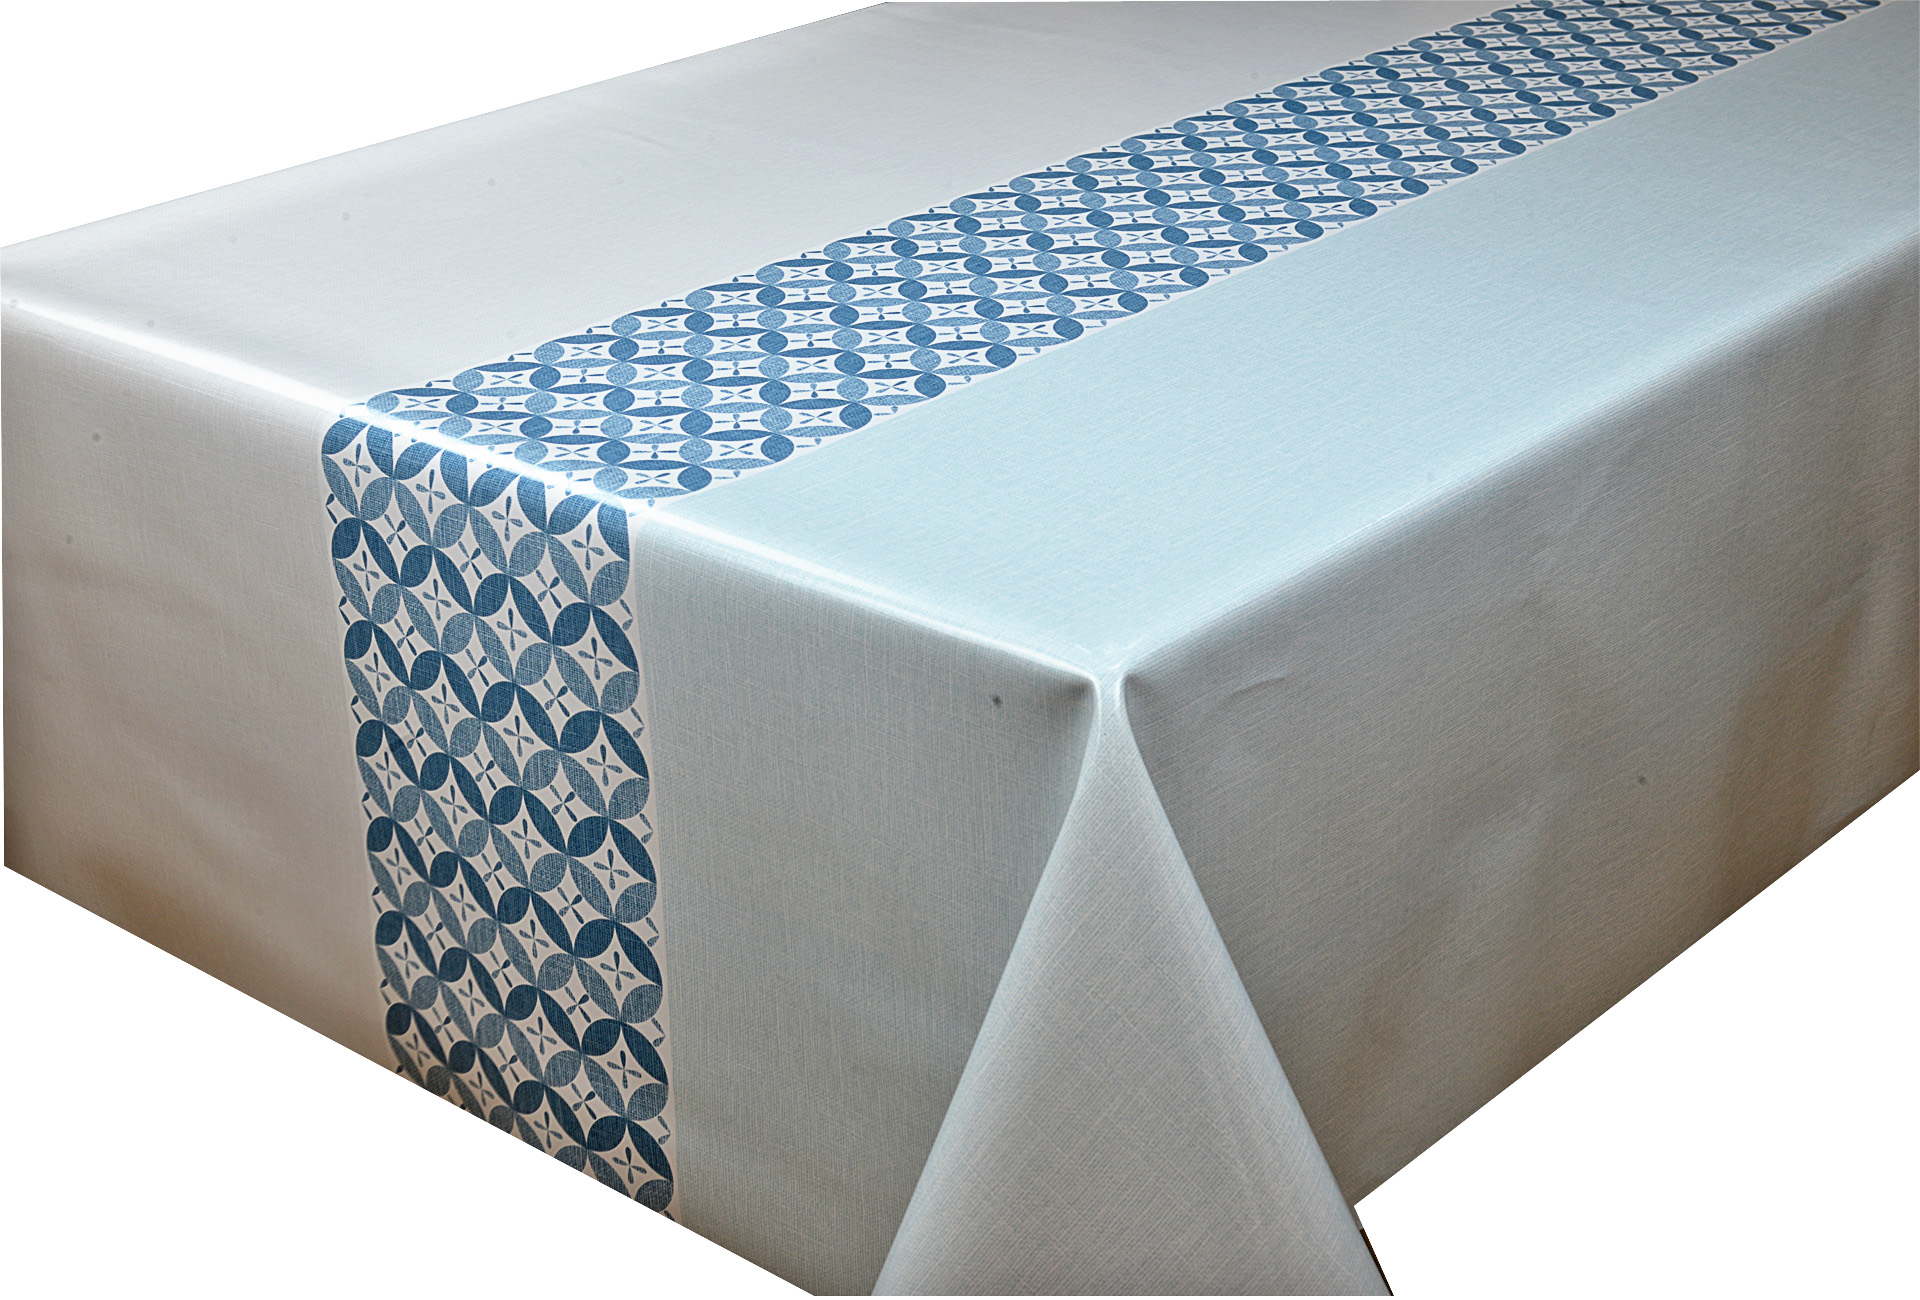 Table Cover - Printed Table Cover - Europe Design Table Cover - BS-N8196